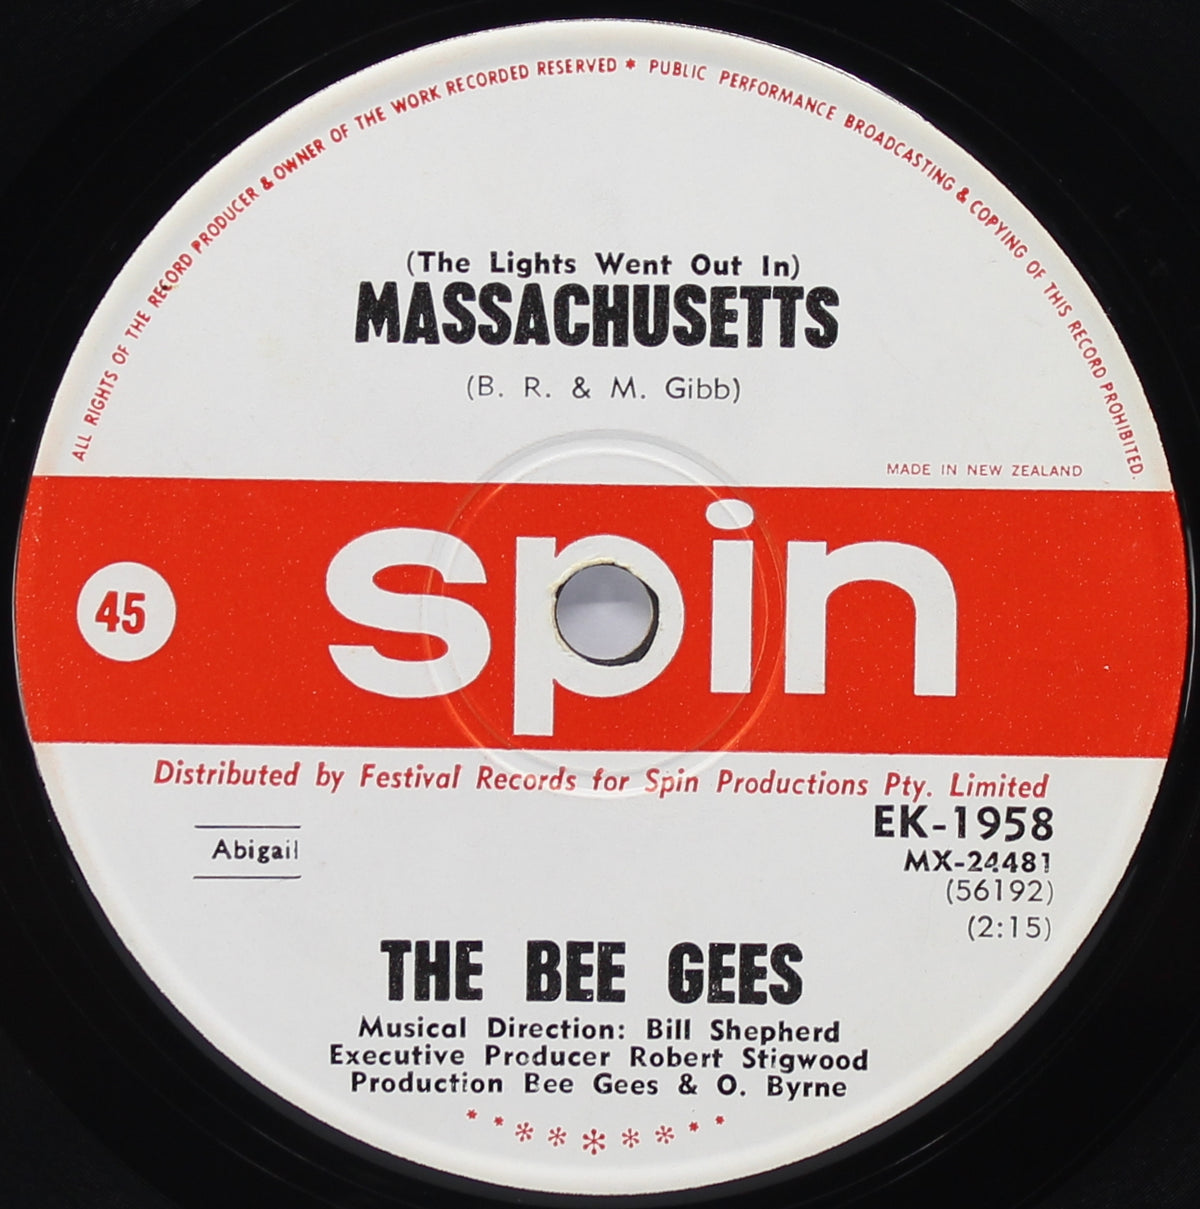 Bee Gees, (The Lights Went Out In) Massachusetts, Vinyl 7&quot; (45rpm), New Zealand 1967 (s 1183)